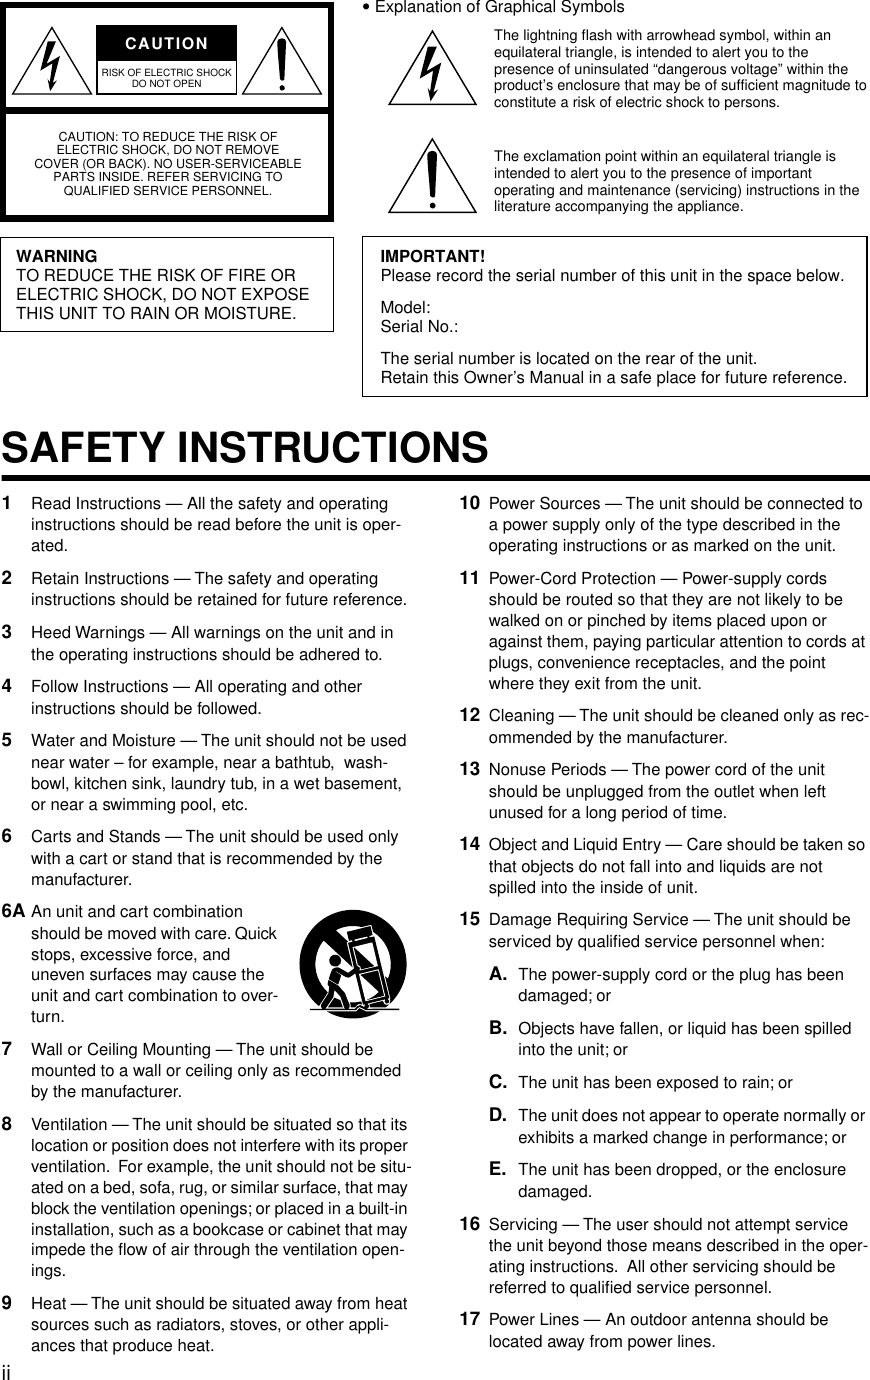 Page 2 of 9 - Yamaha YST-M40_EF YST-M40 OWNER'S MANUAL